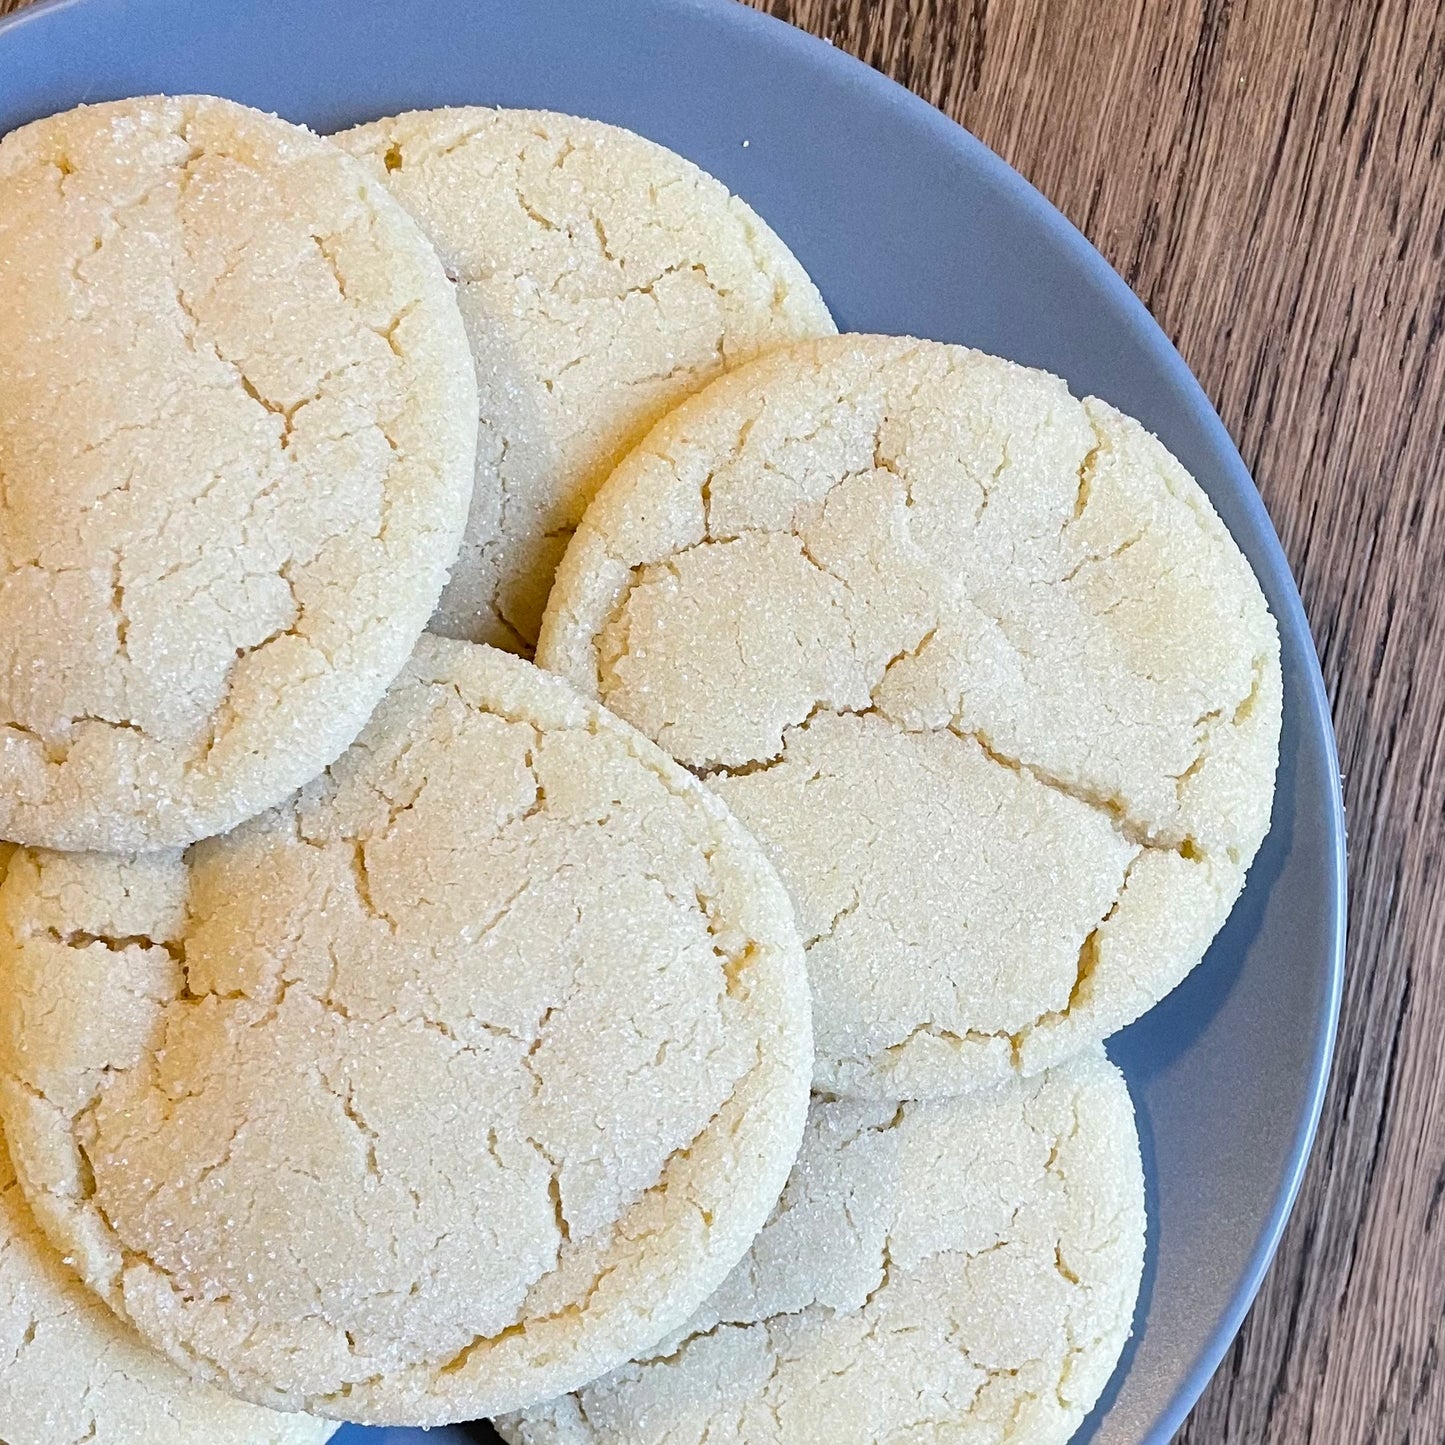 15 Sugar Cookies (Delivered Thursday)